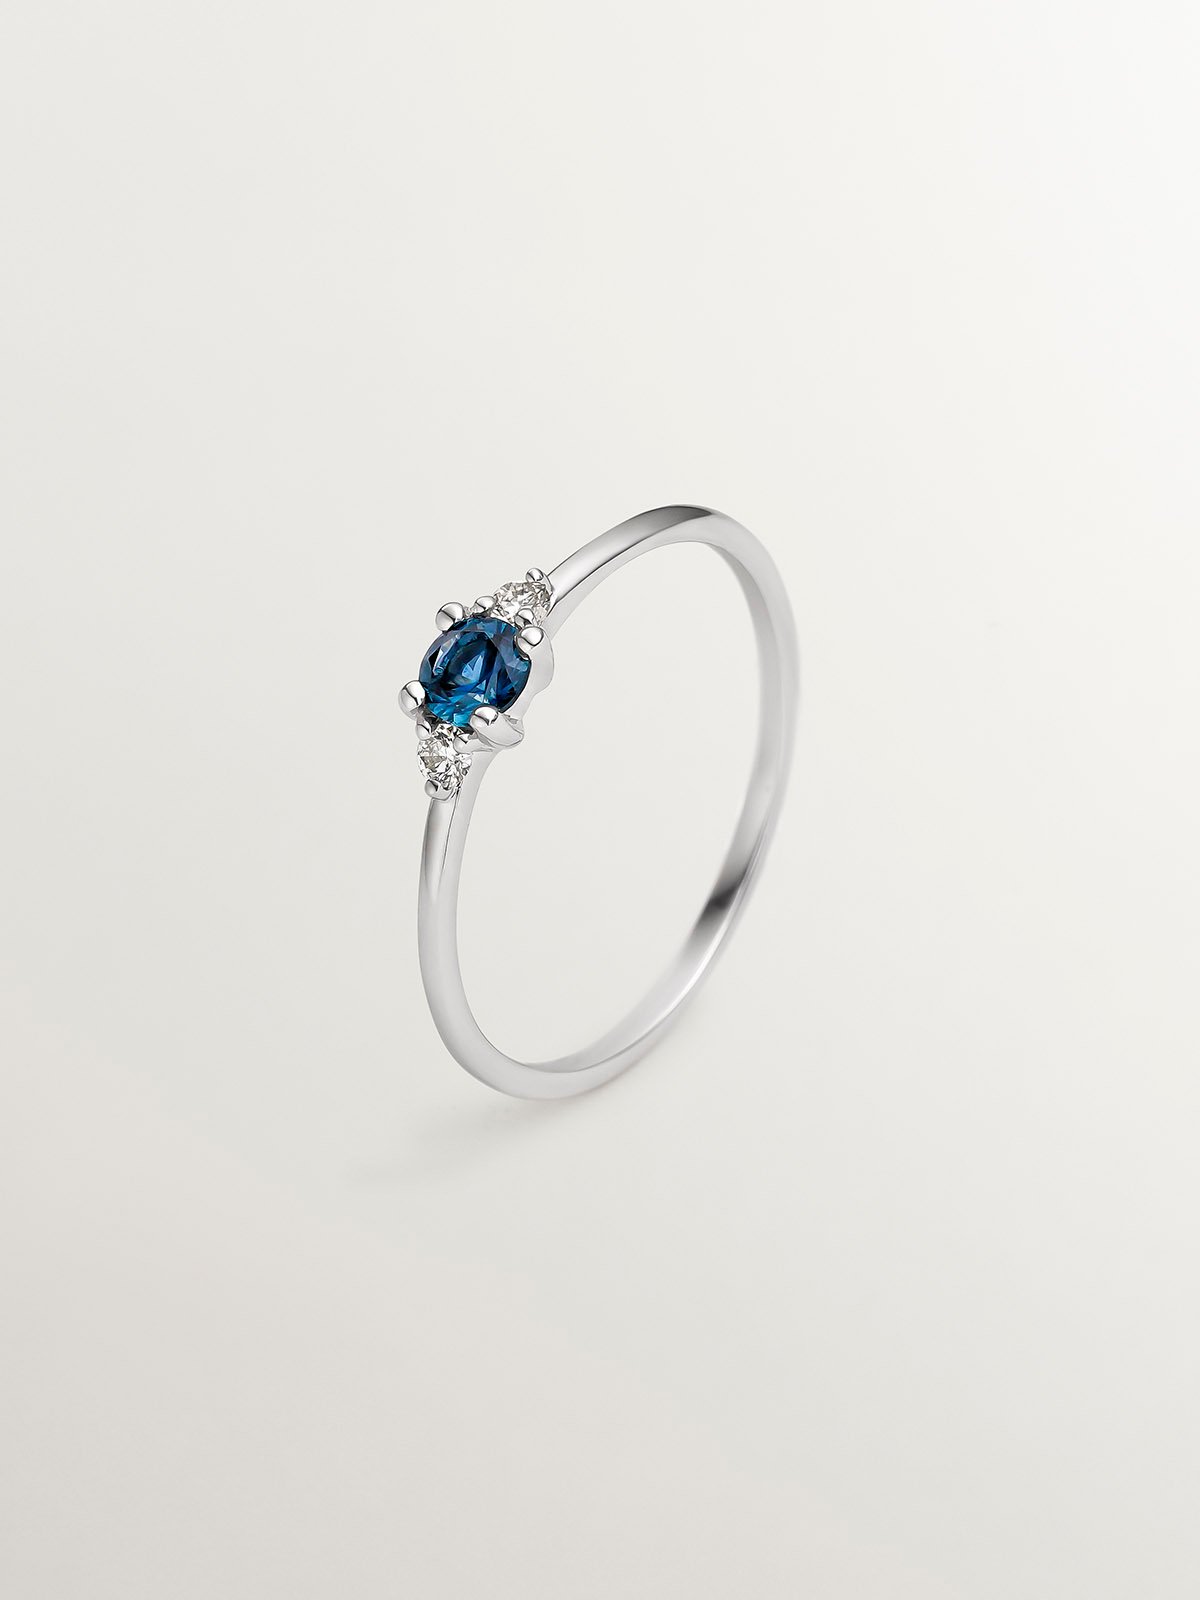 9K White Gold Ring with Blue Sapphire and Diamonds